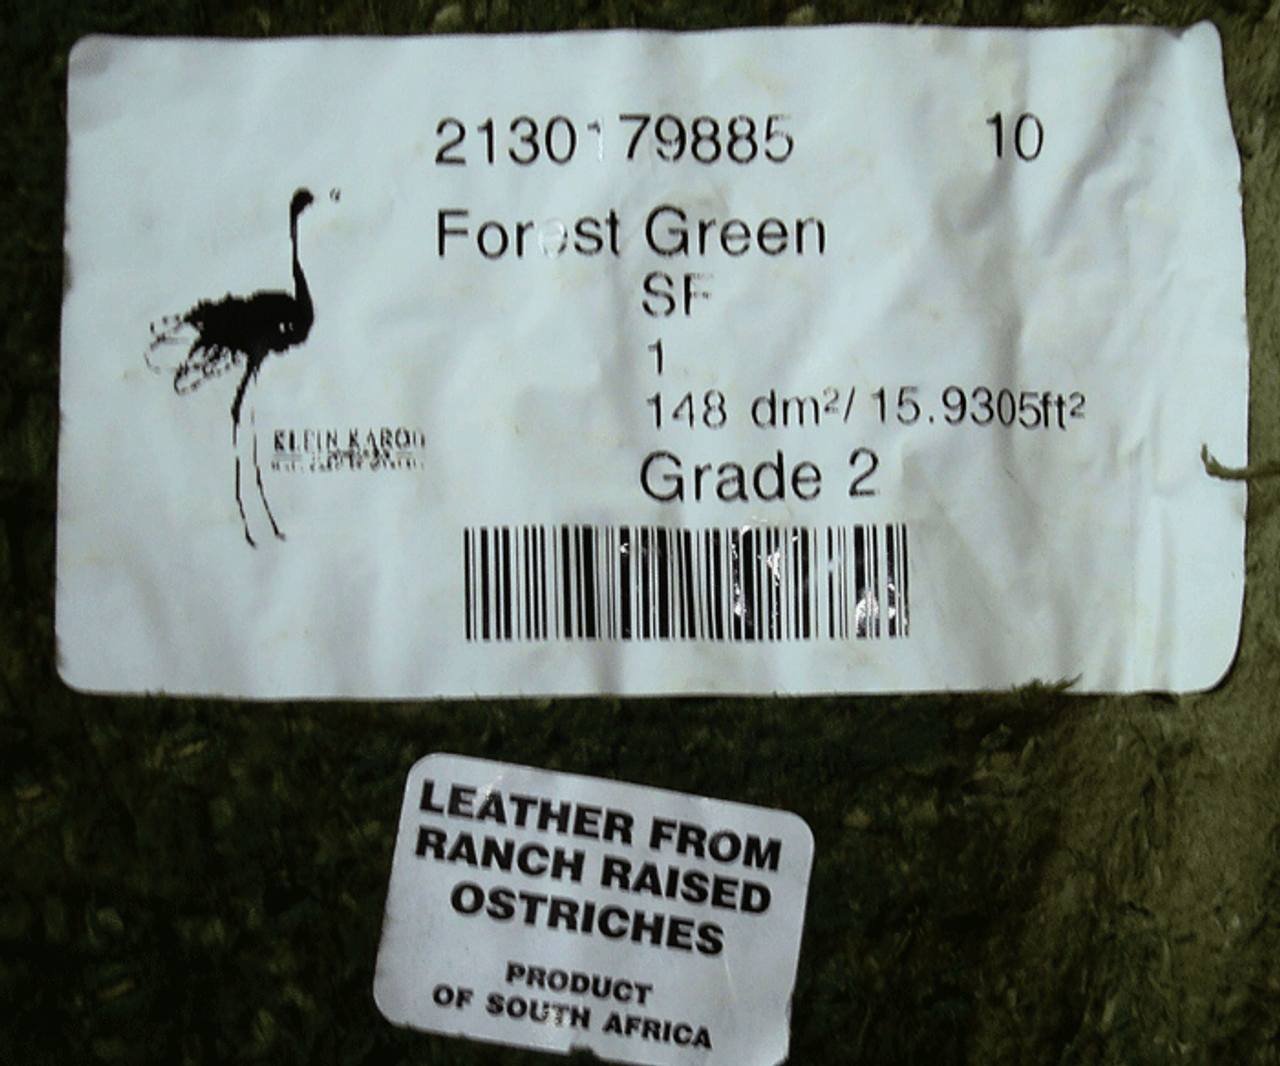 Ostrich Skin Leather - FOREST GREEN SF - 15.9305 sq ft - Grade 2